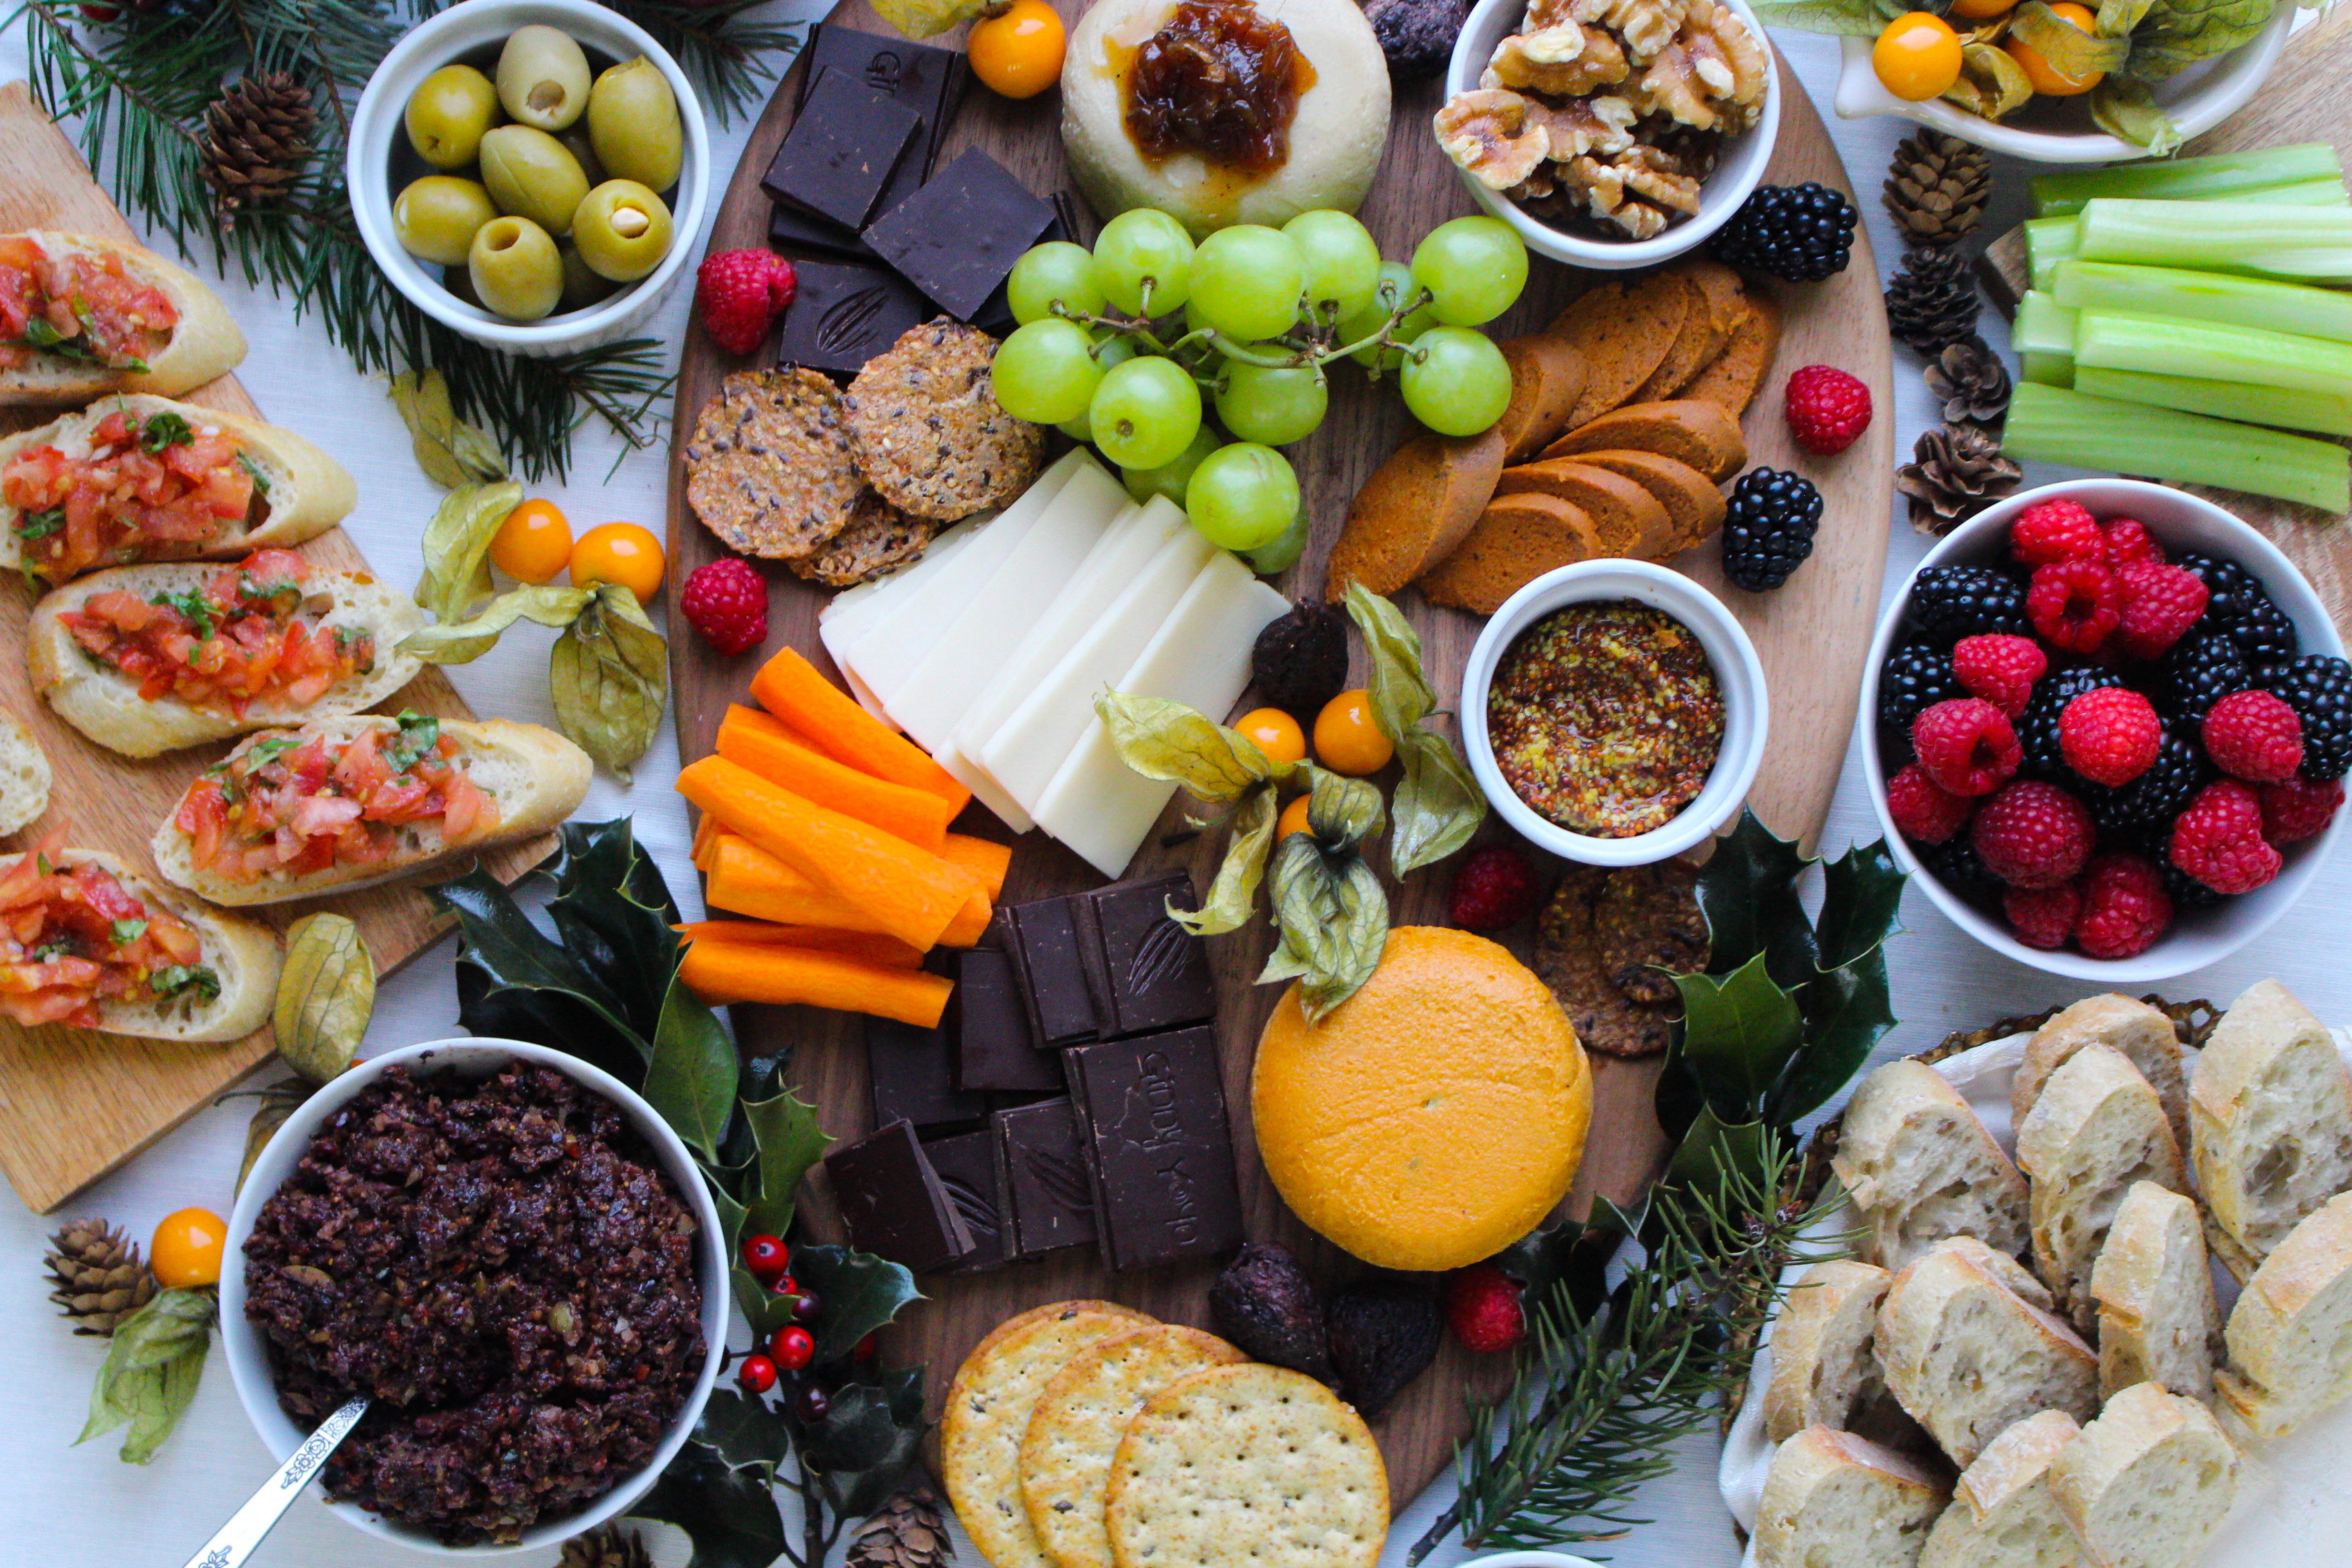 Build Your Own Cruelty-Free Cheese & Charcuterie Board